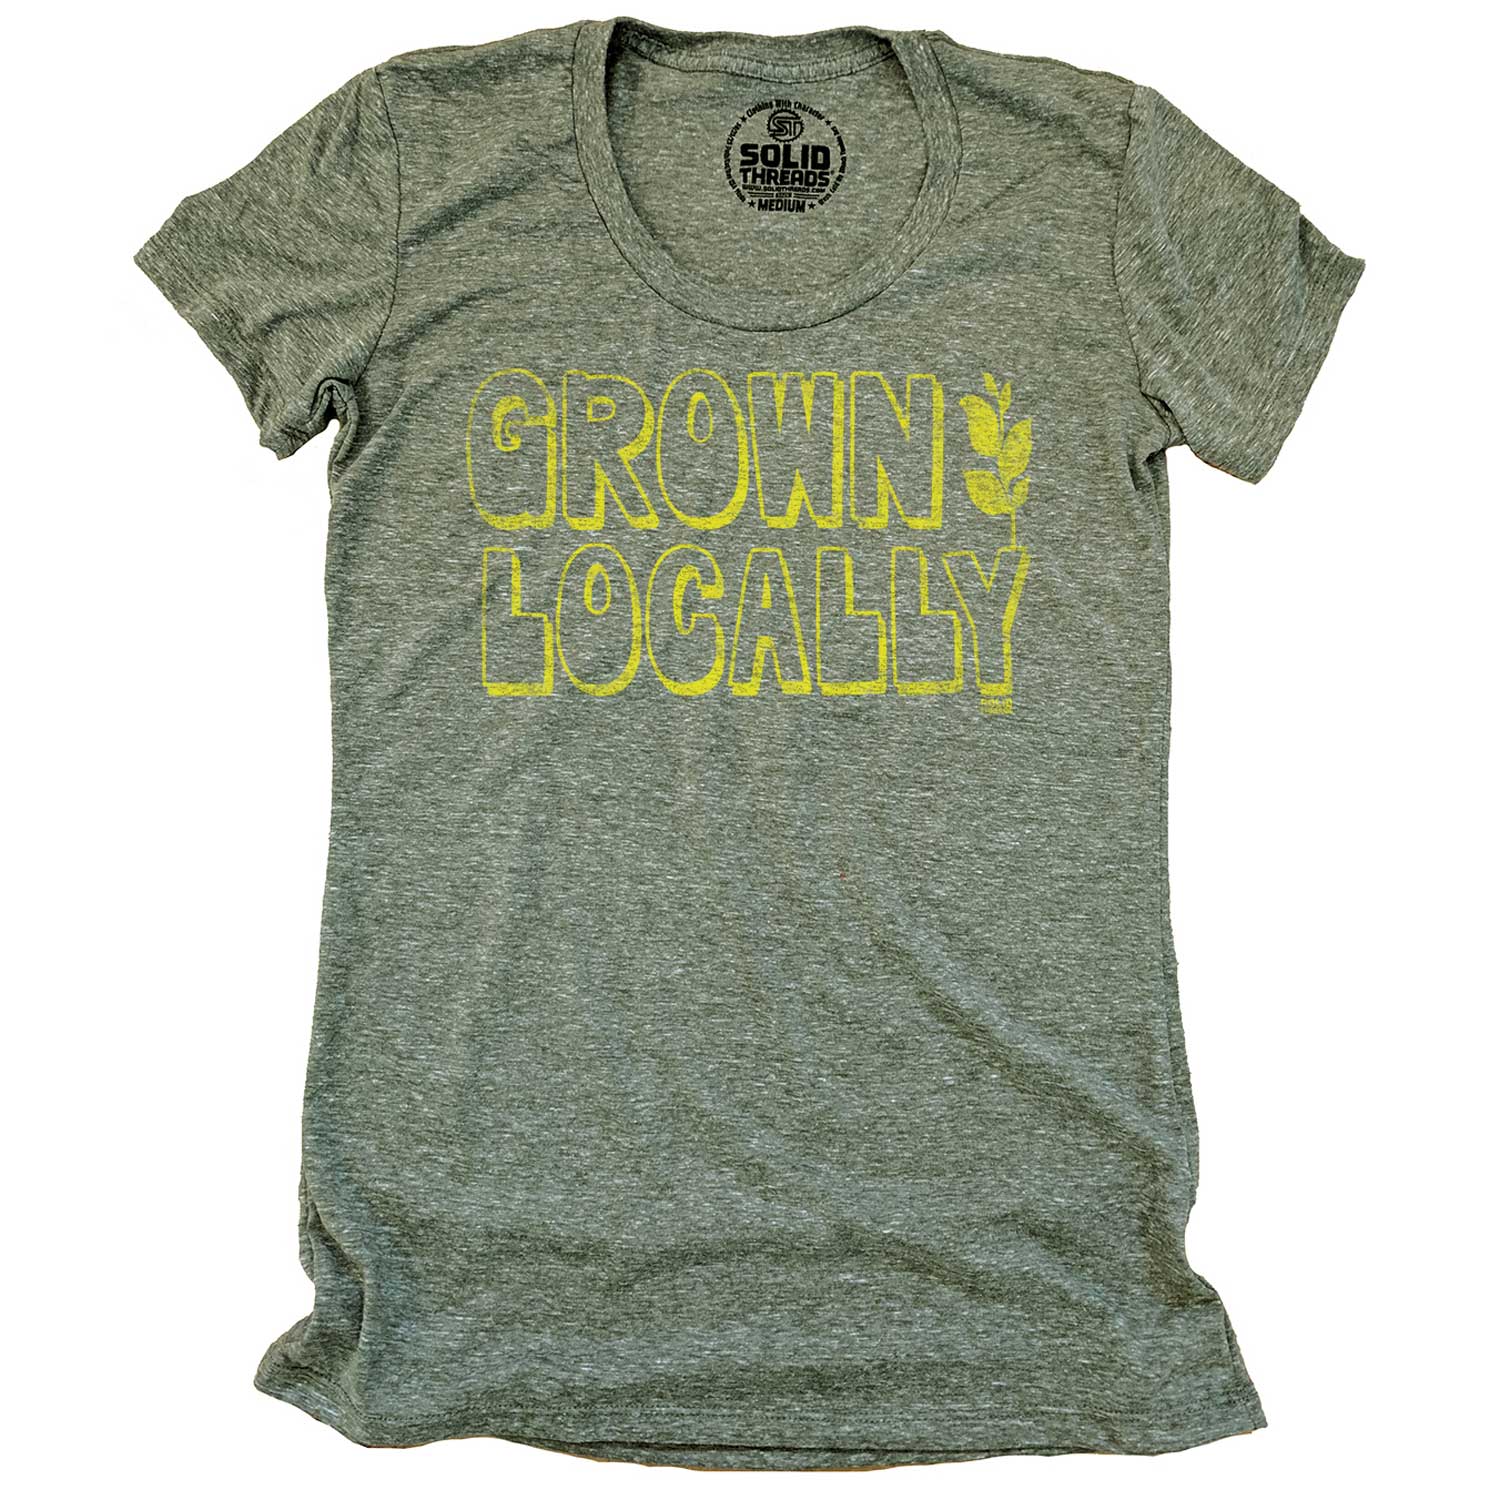 Women's Grown Locally Vintage T-shirt | SOLID THREADS